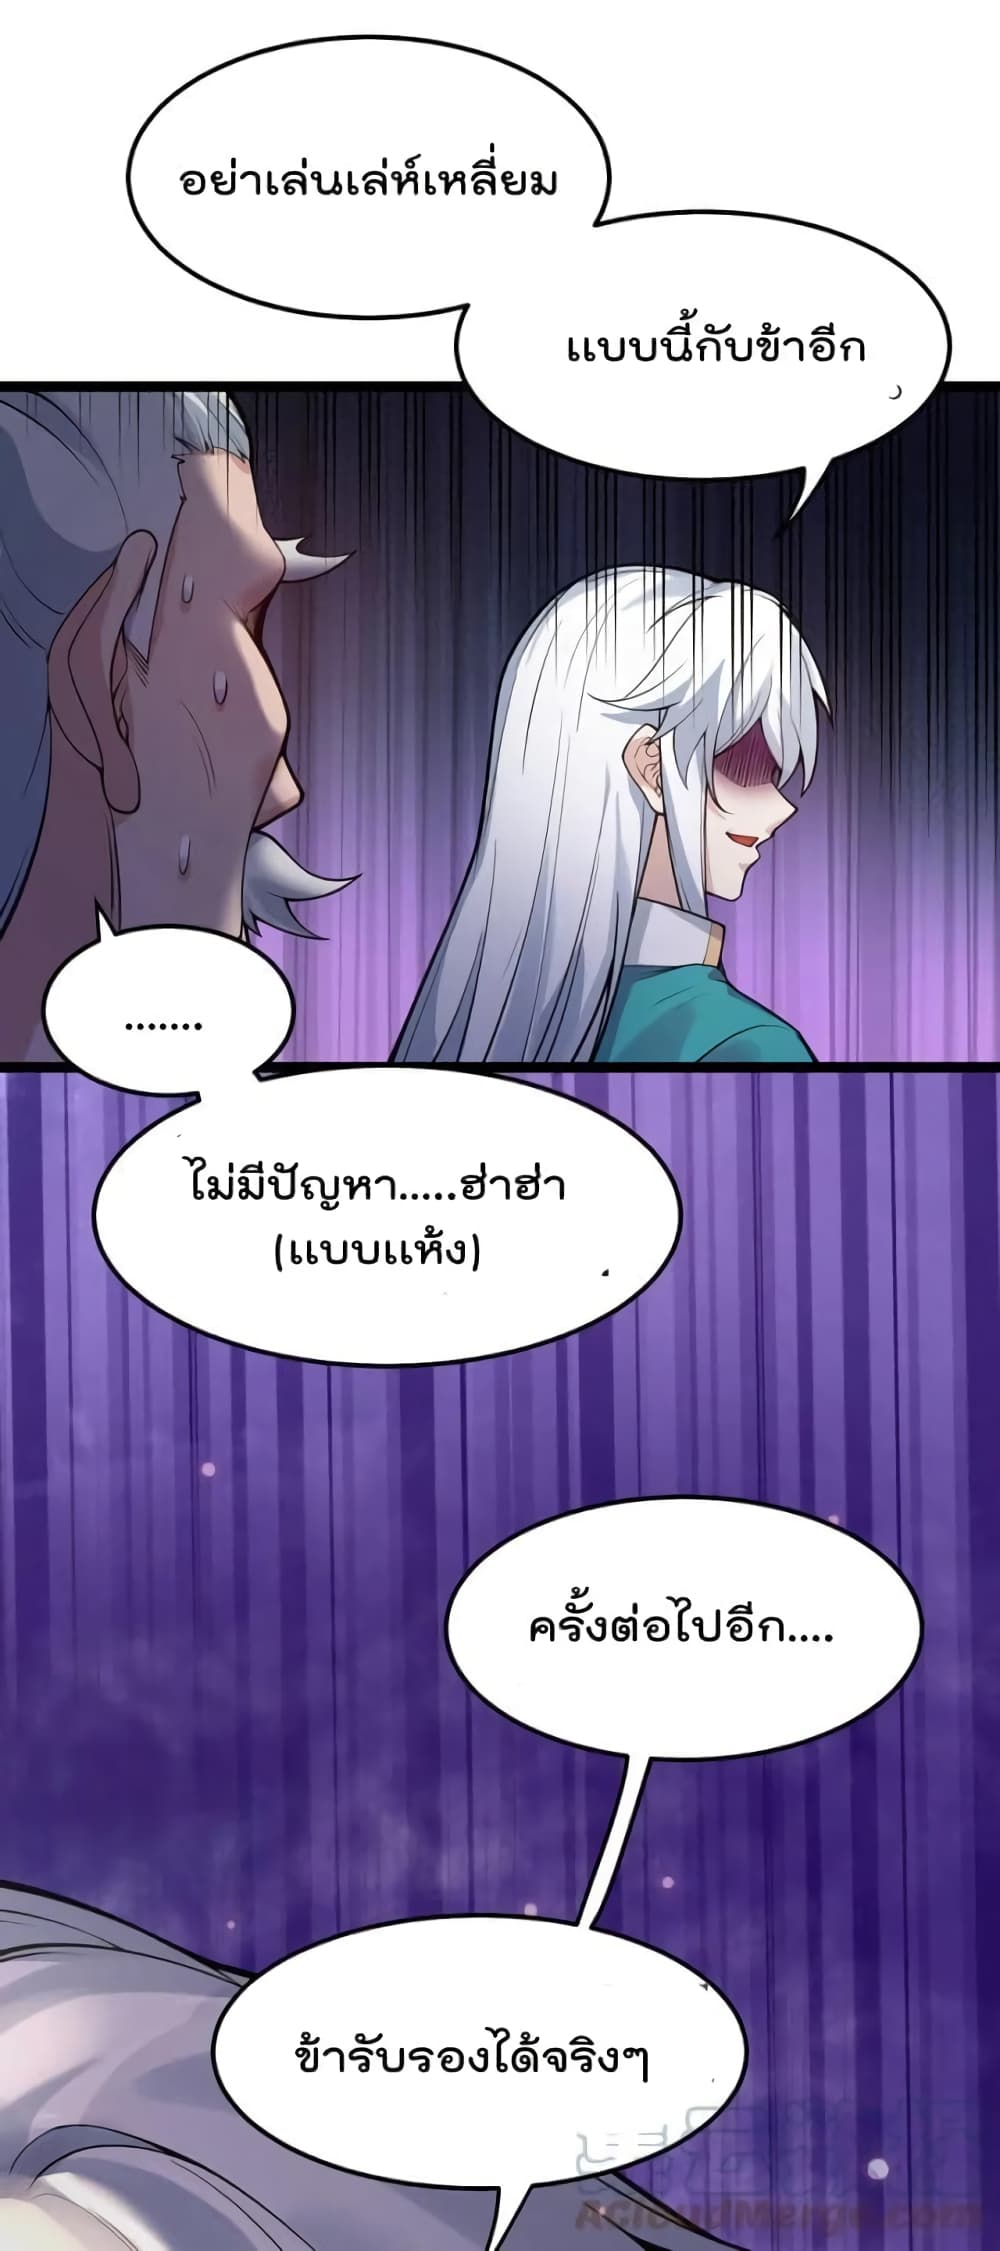 Godsian Masian from Another World ตอนที่ 100 (7)